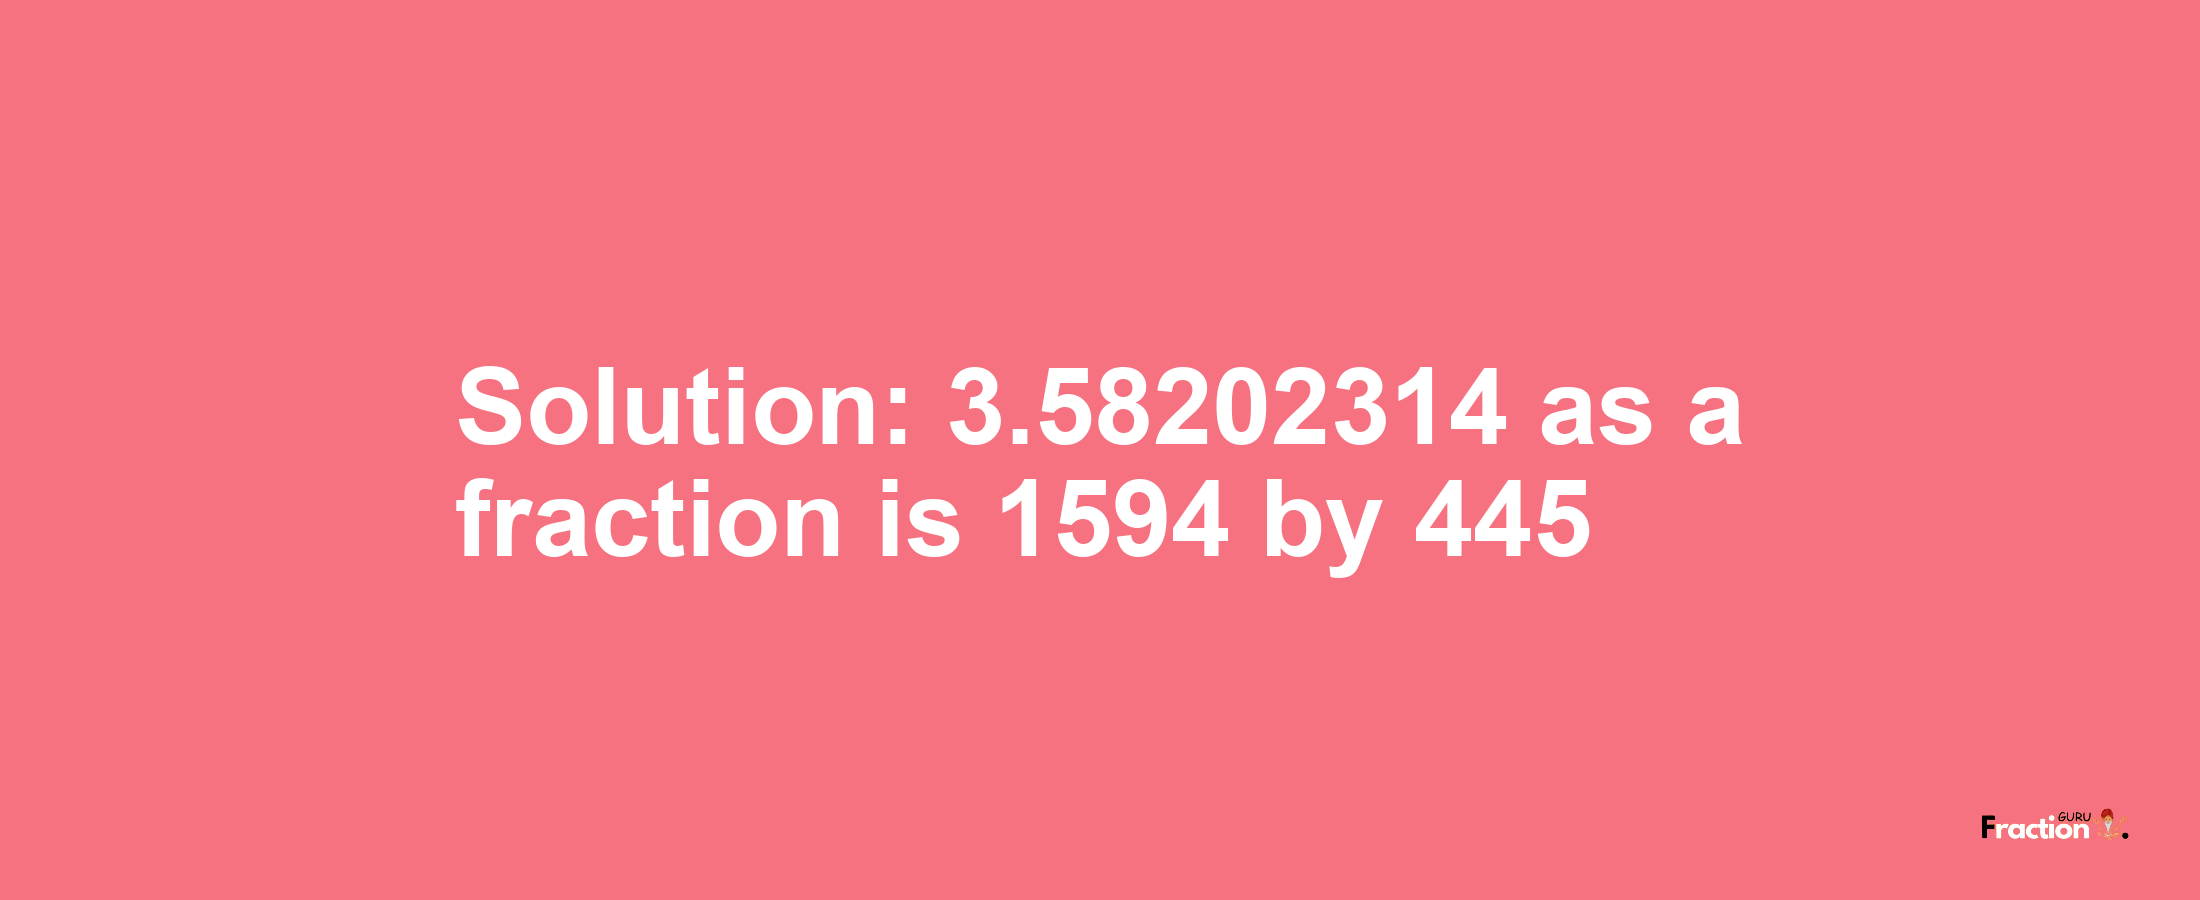 Solution:3.58202314 as a fraction is 1594/445